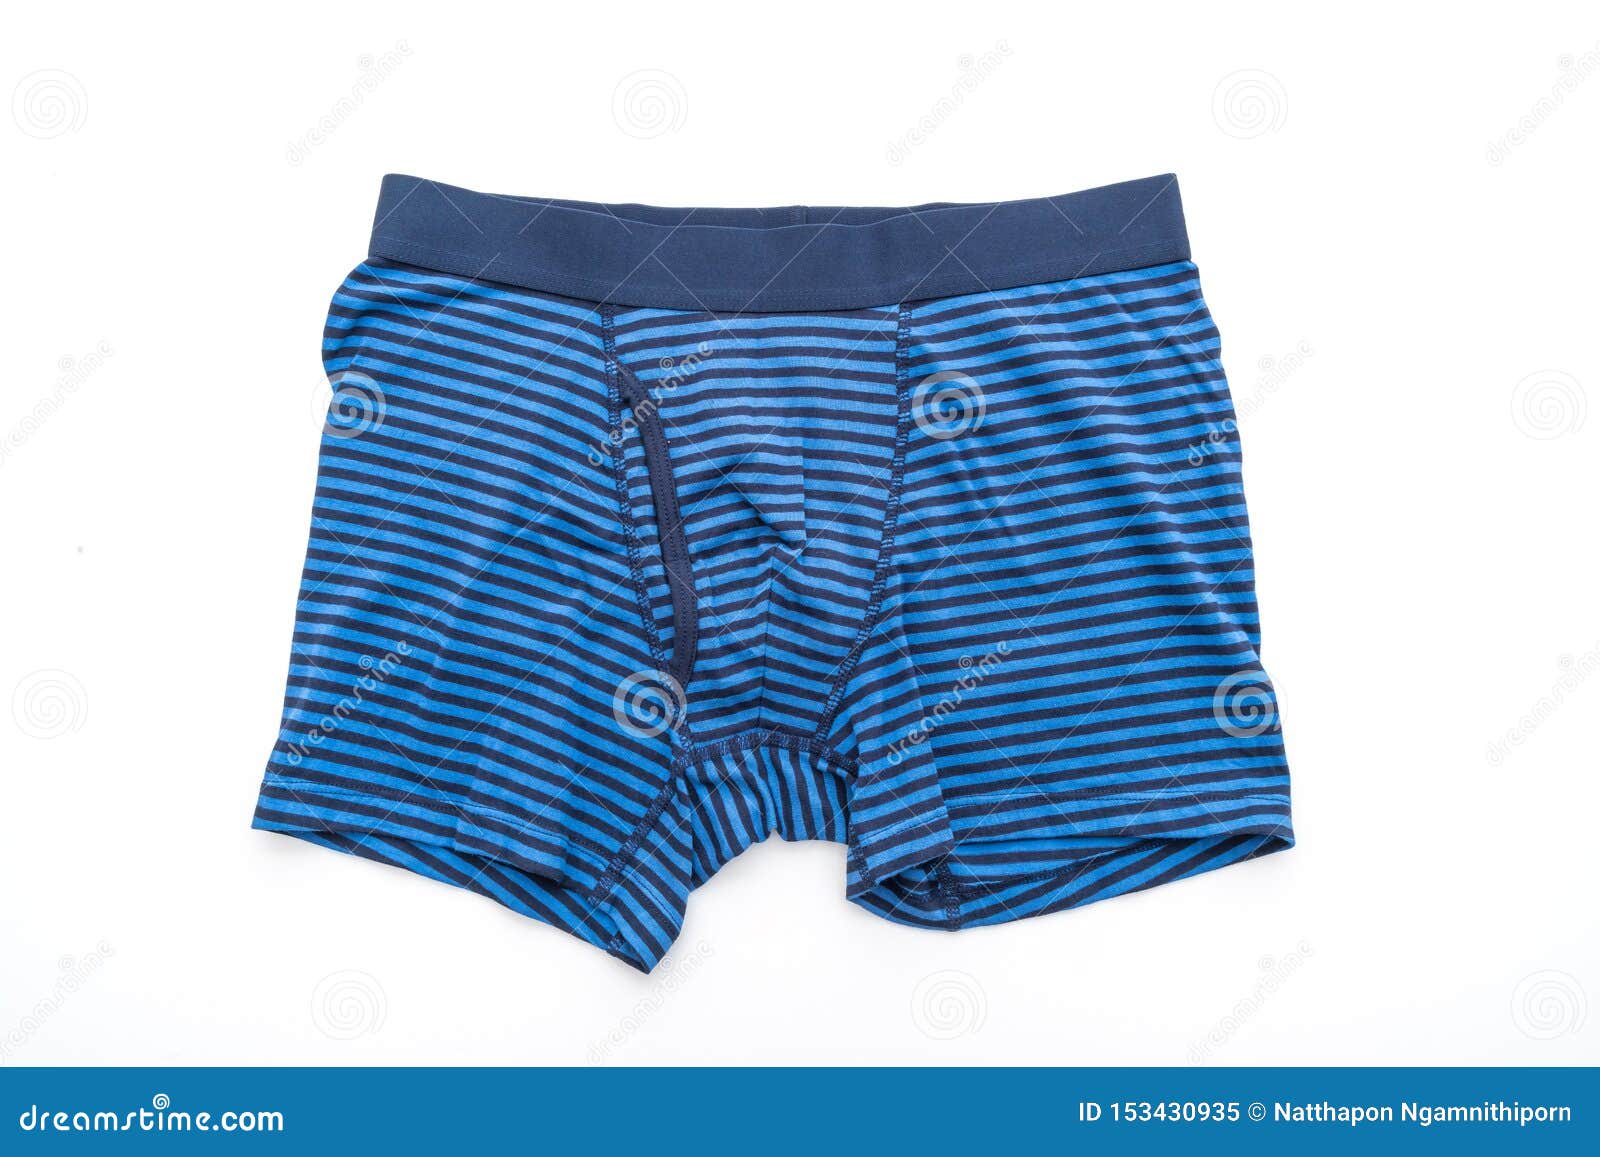 Striped men underwear stock image. Image of clothes - 153430935